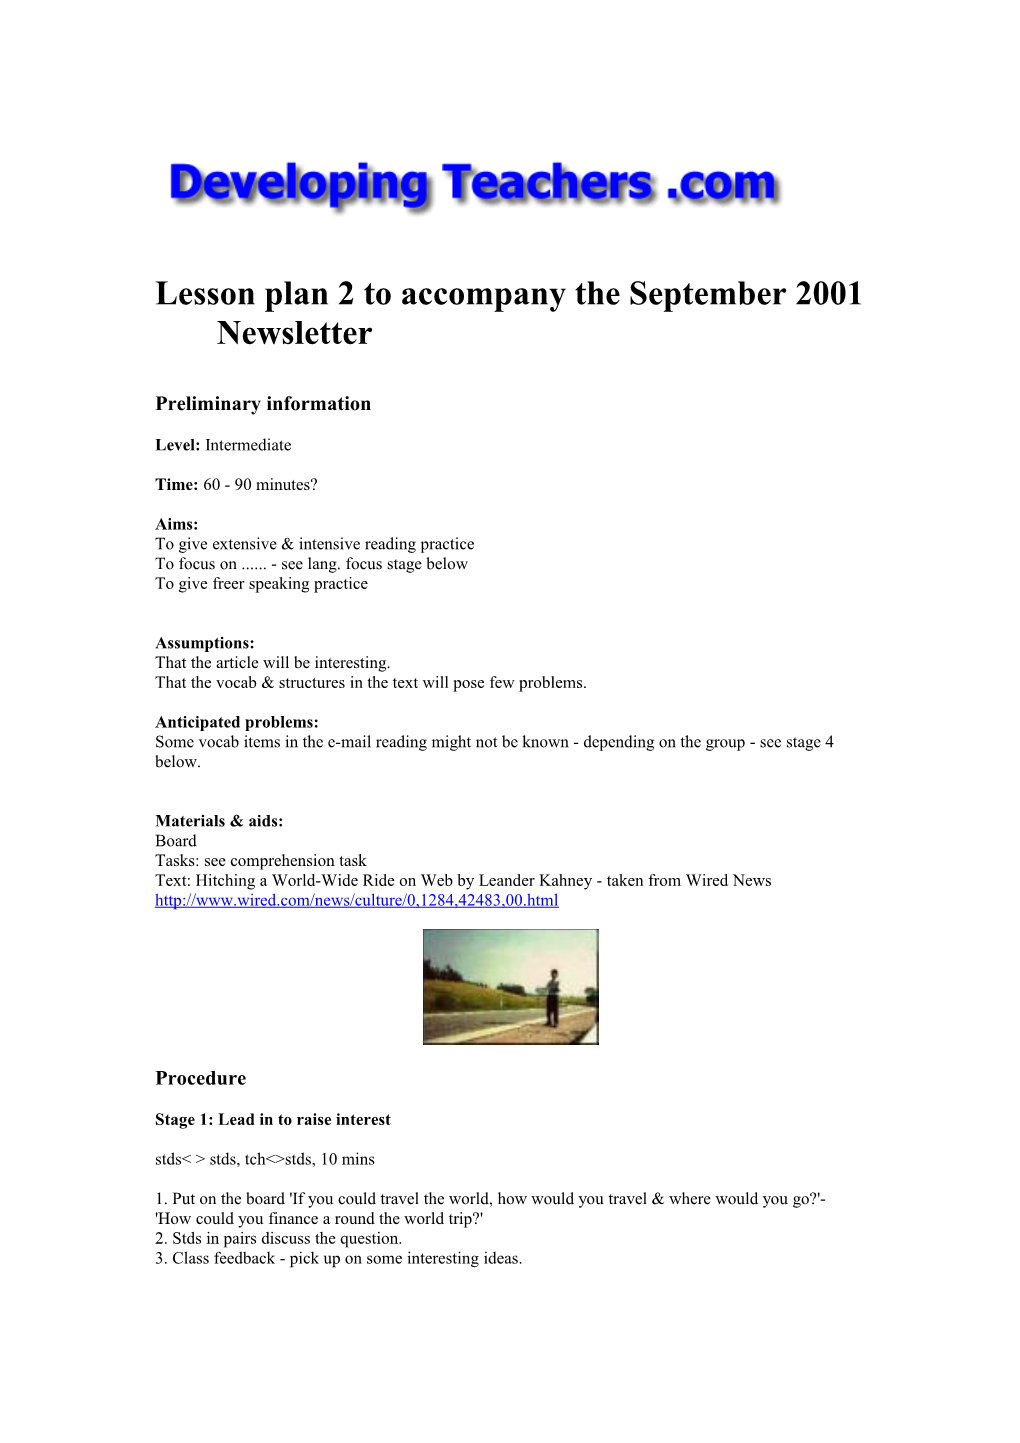 Lesson Plan 2 to Accompany the September 2001 Newsletter